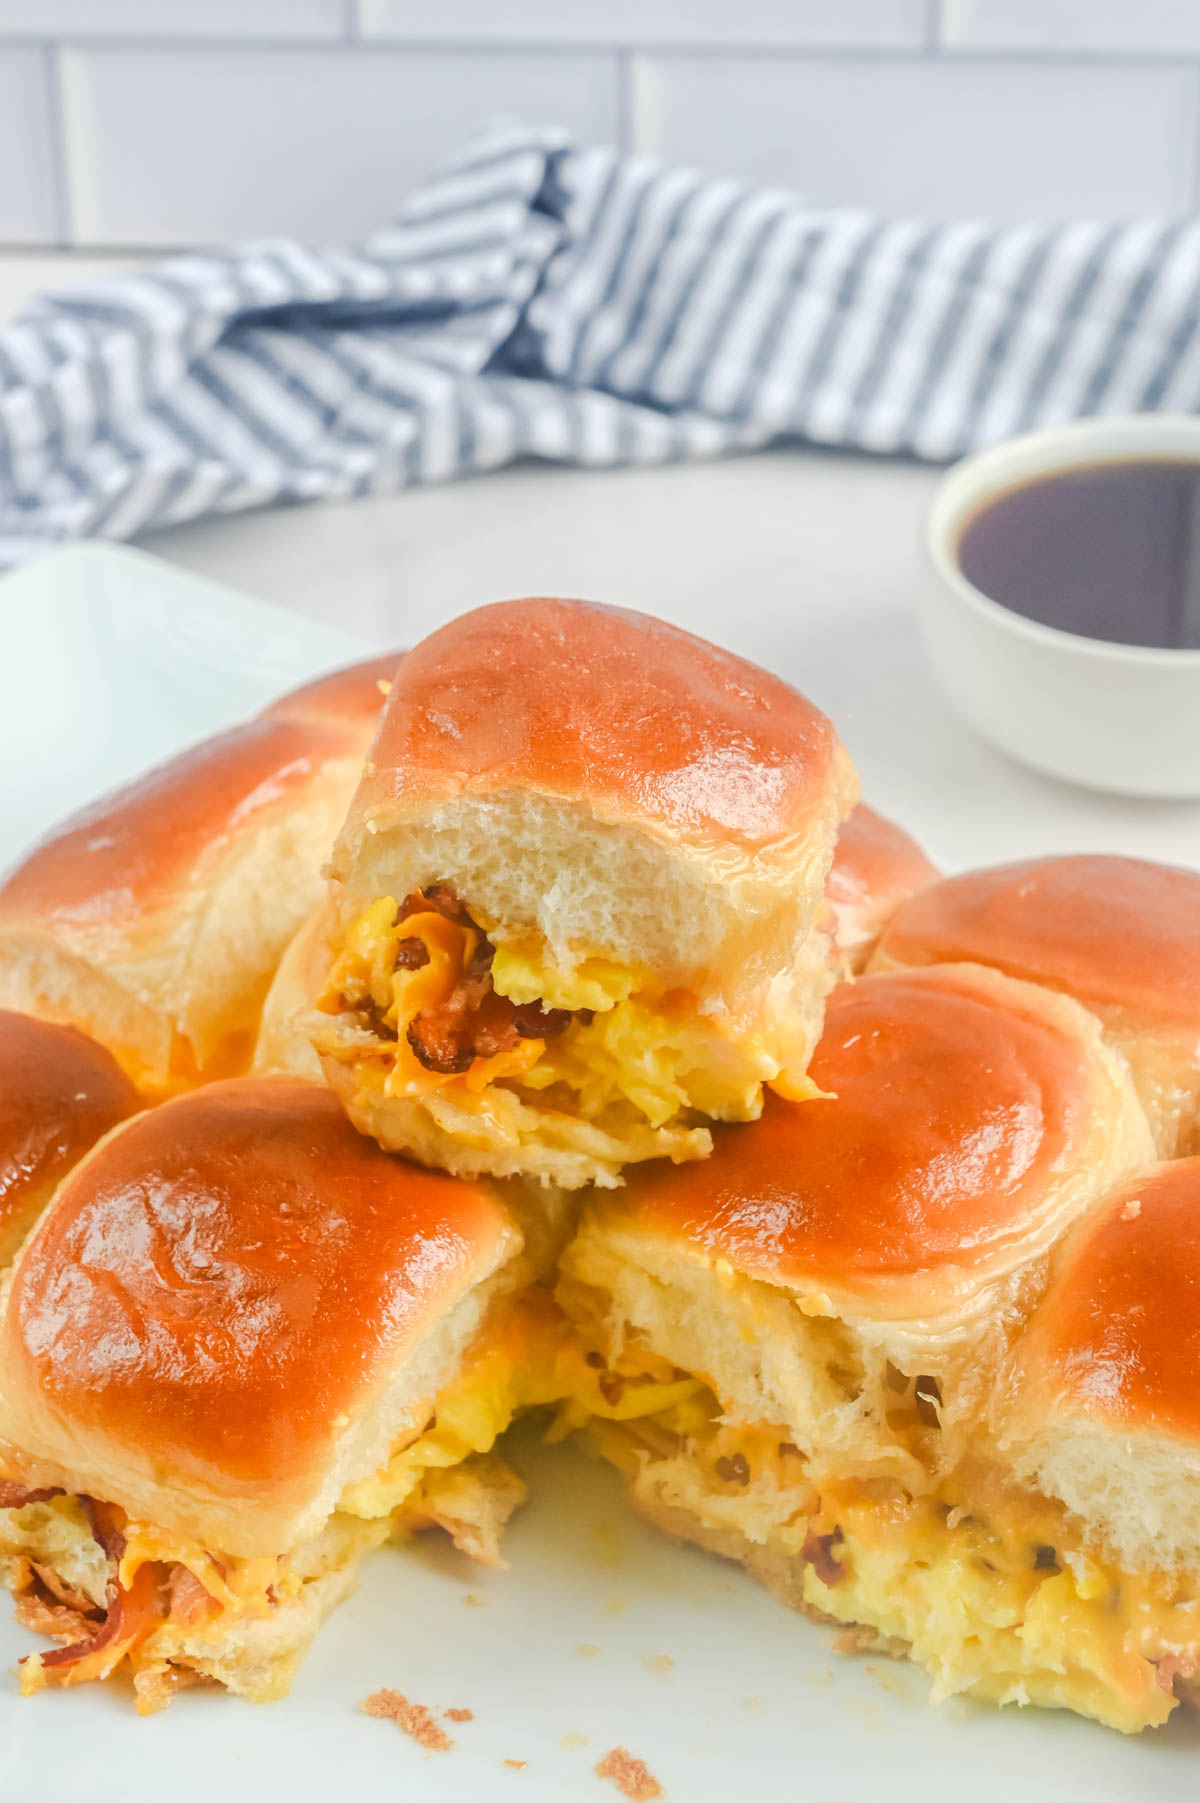 Breakfast sliders on a plate with a cup of coffee.